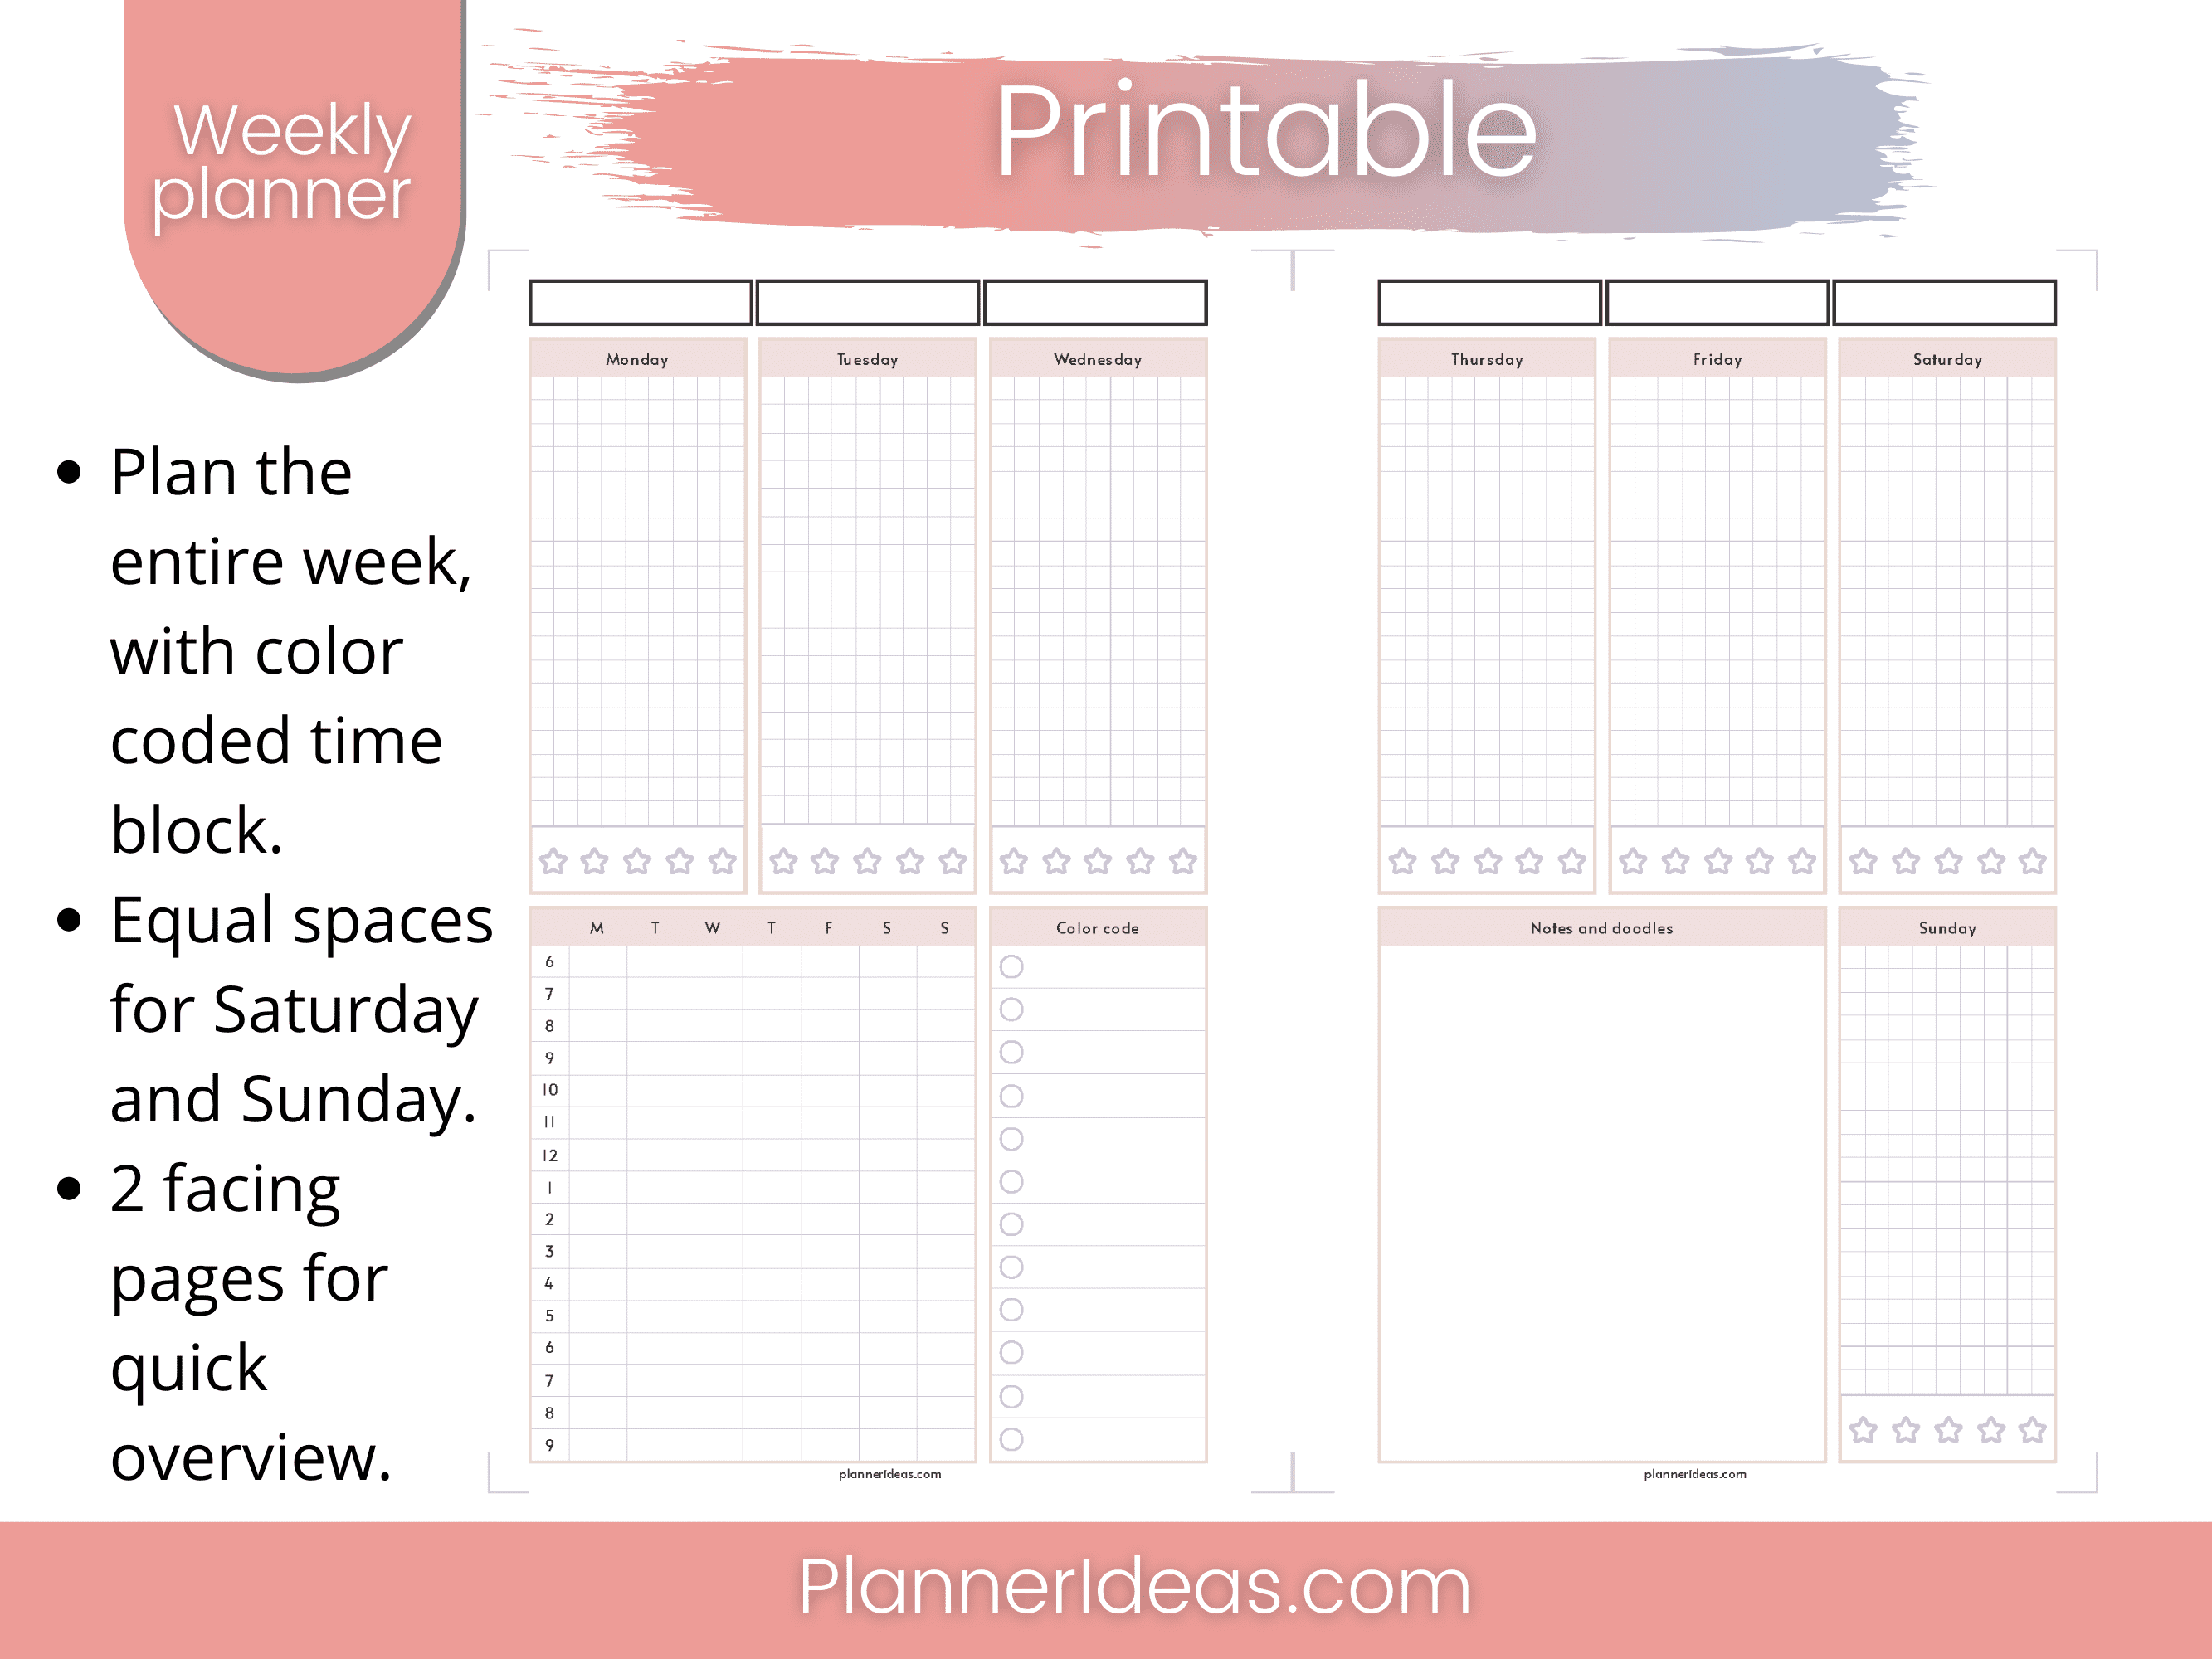 Weekly planner with time block